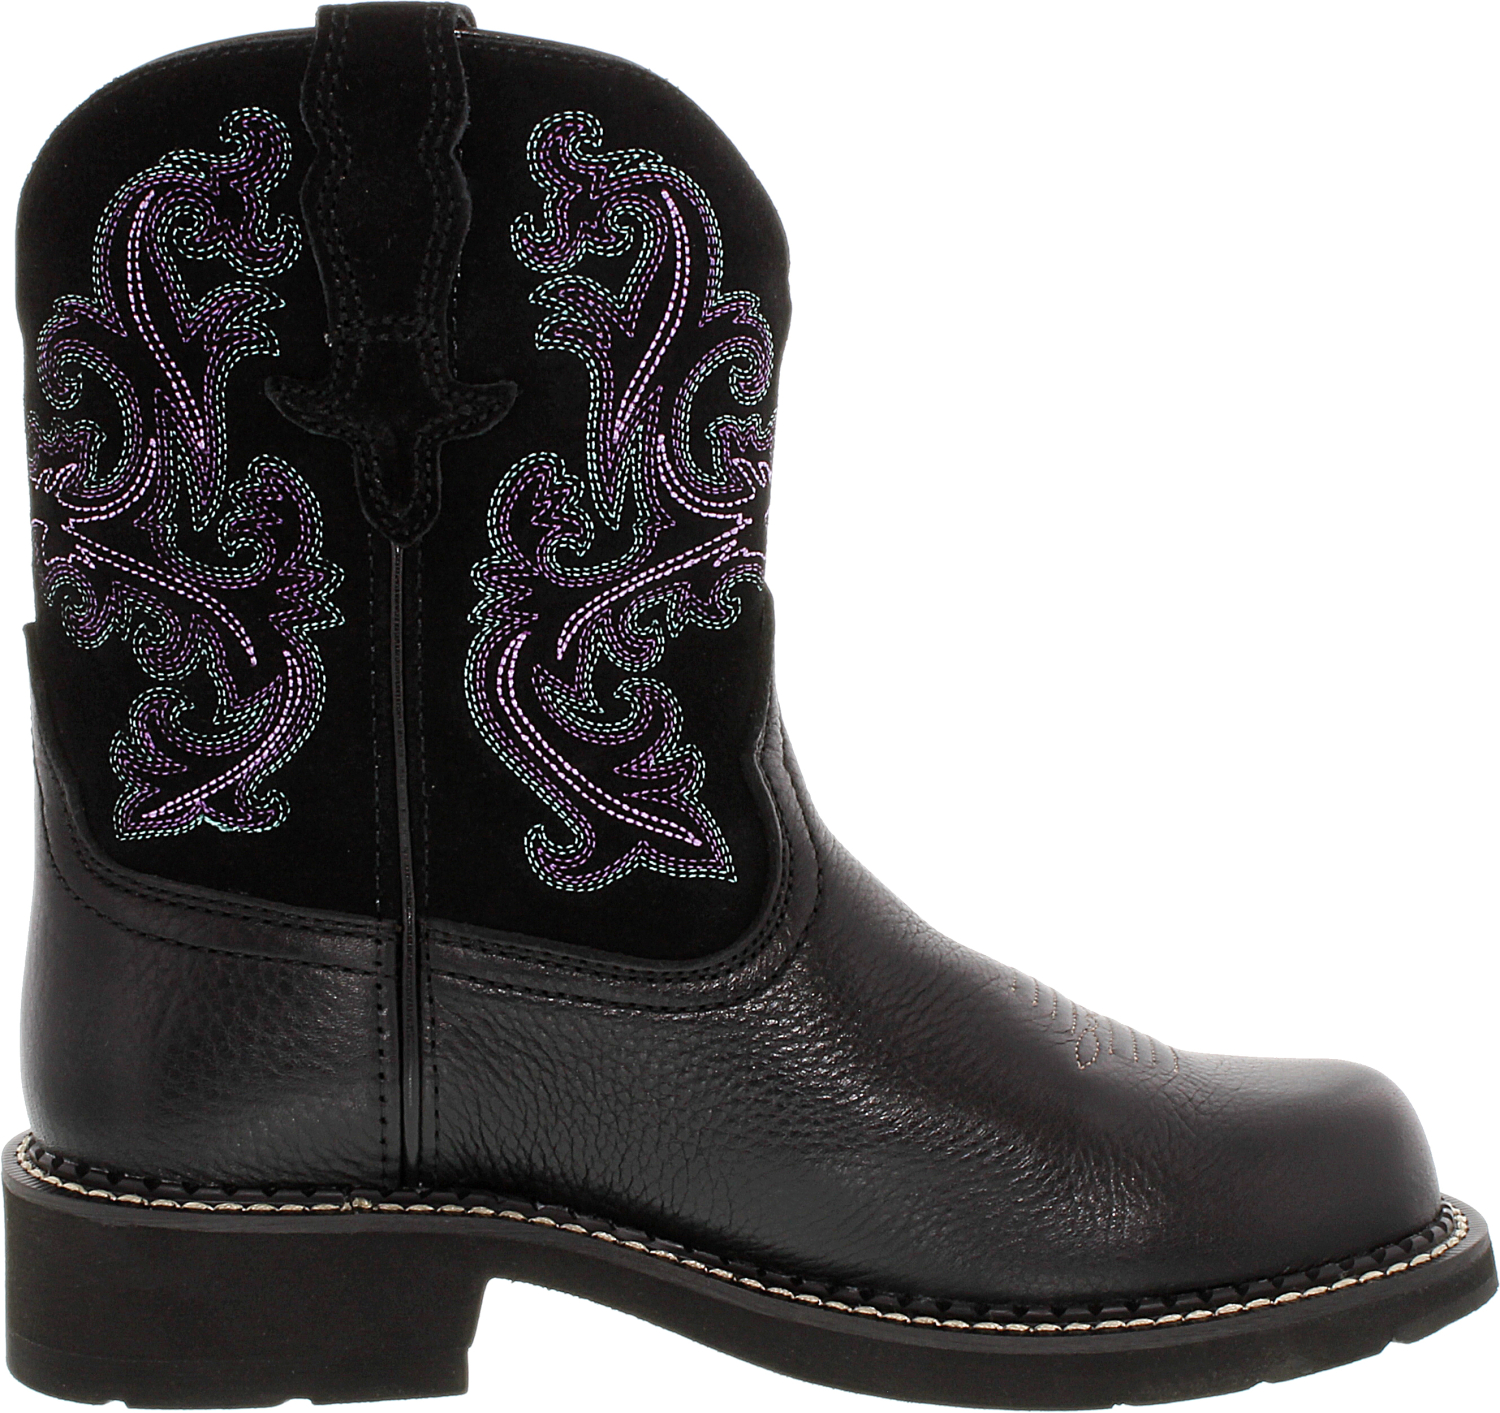 Ariat Women's Fatbaby Ii Ankle-High Leather Boot | eBay